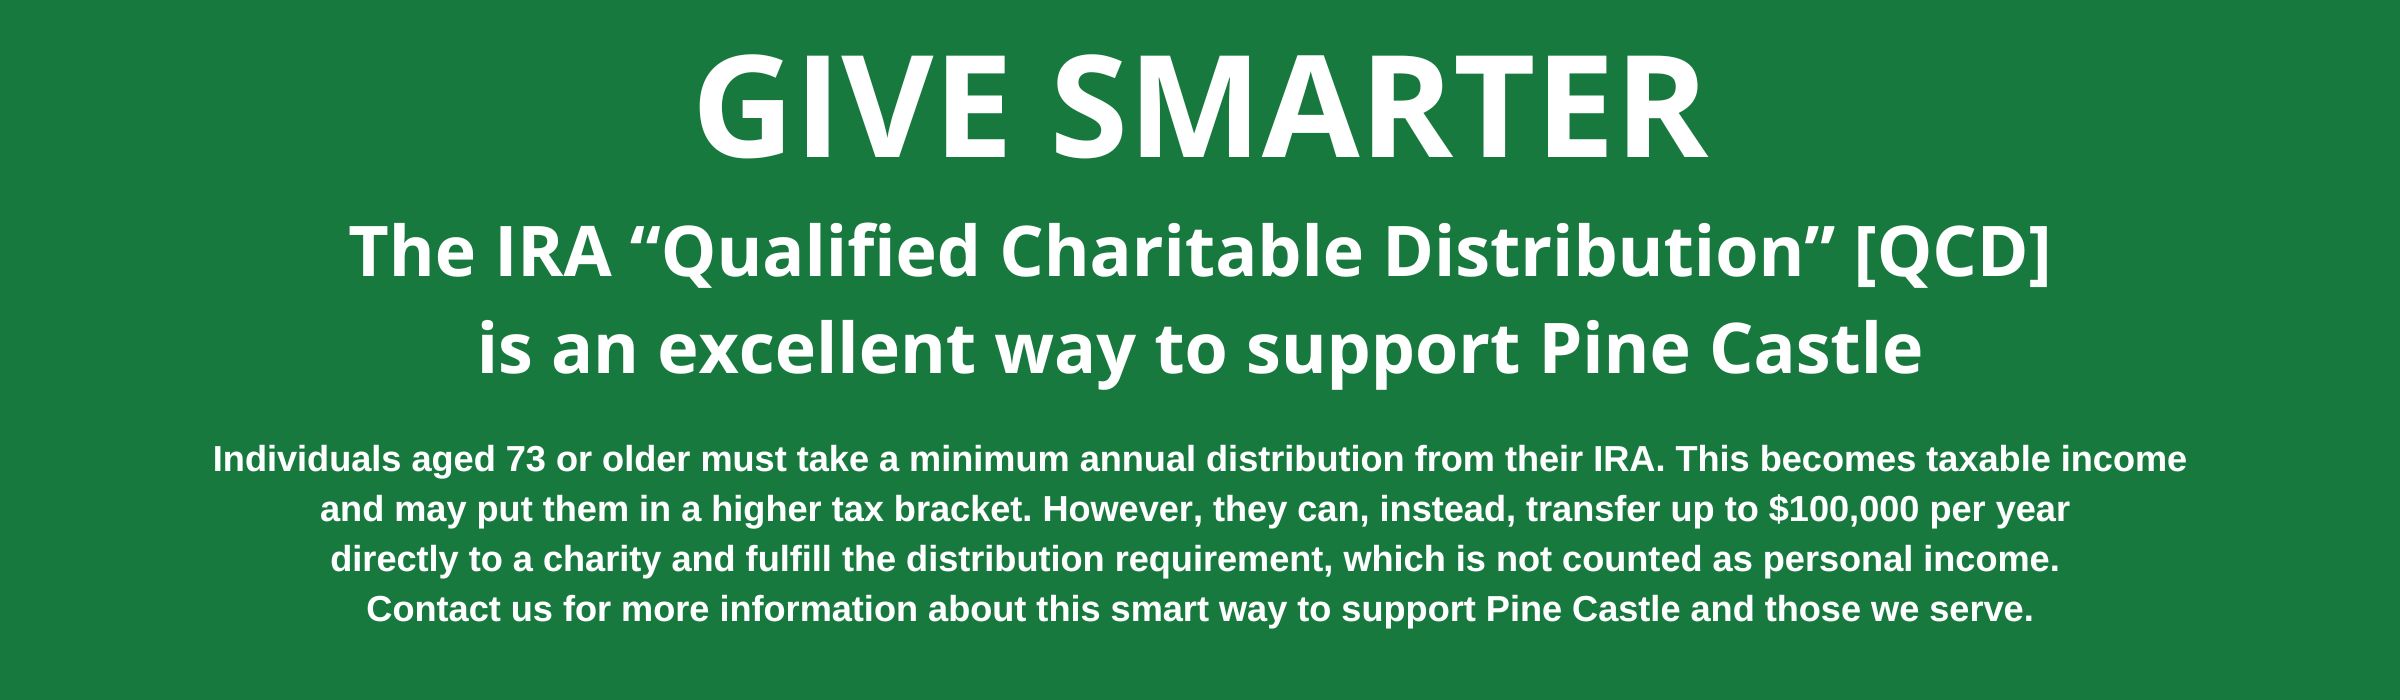 The IRA "Qualified Charitable Distribution" [QCD] is an excellent way to support Pine Castle